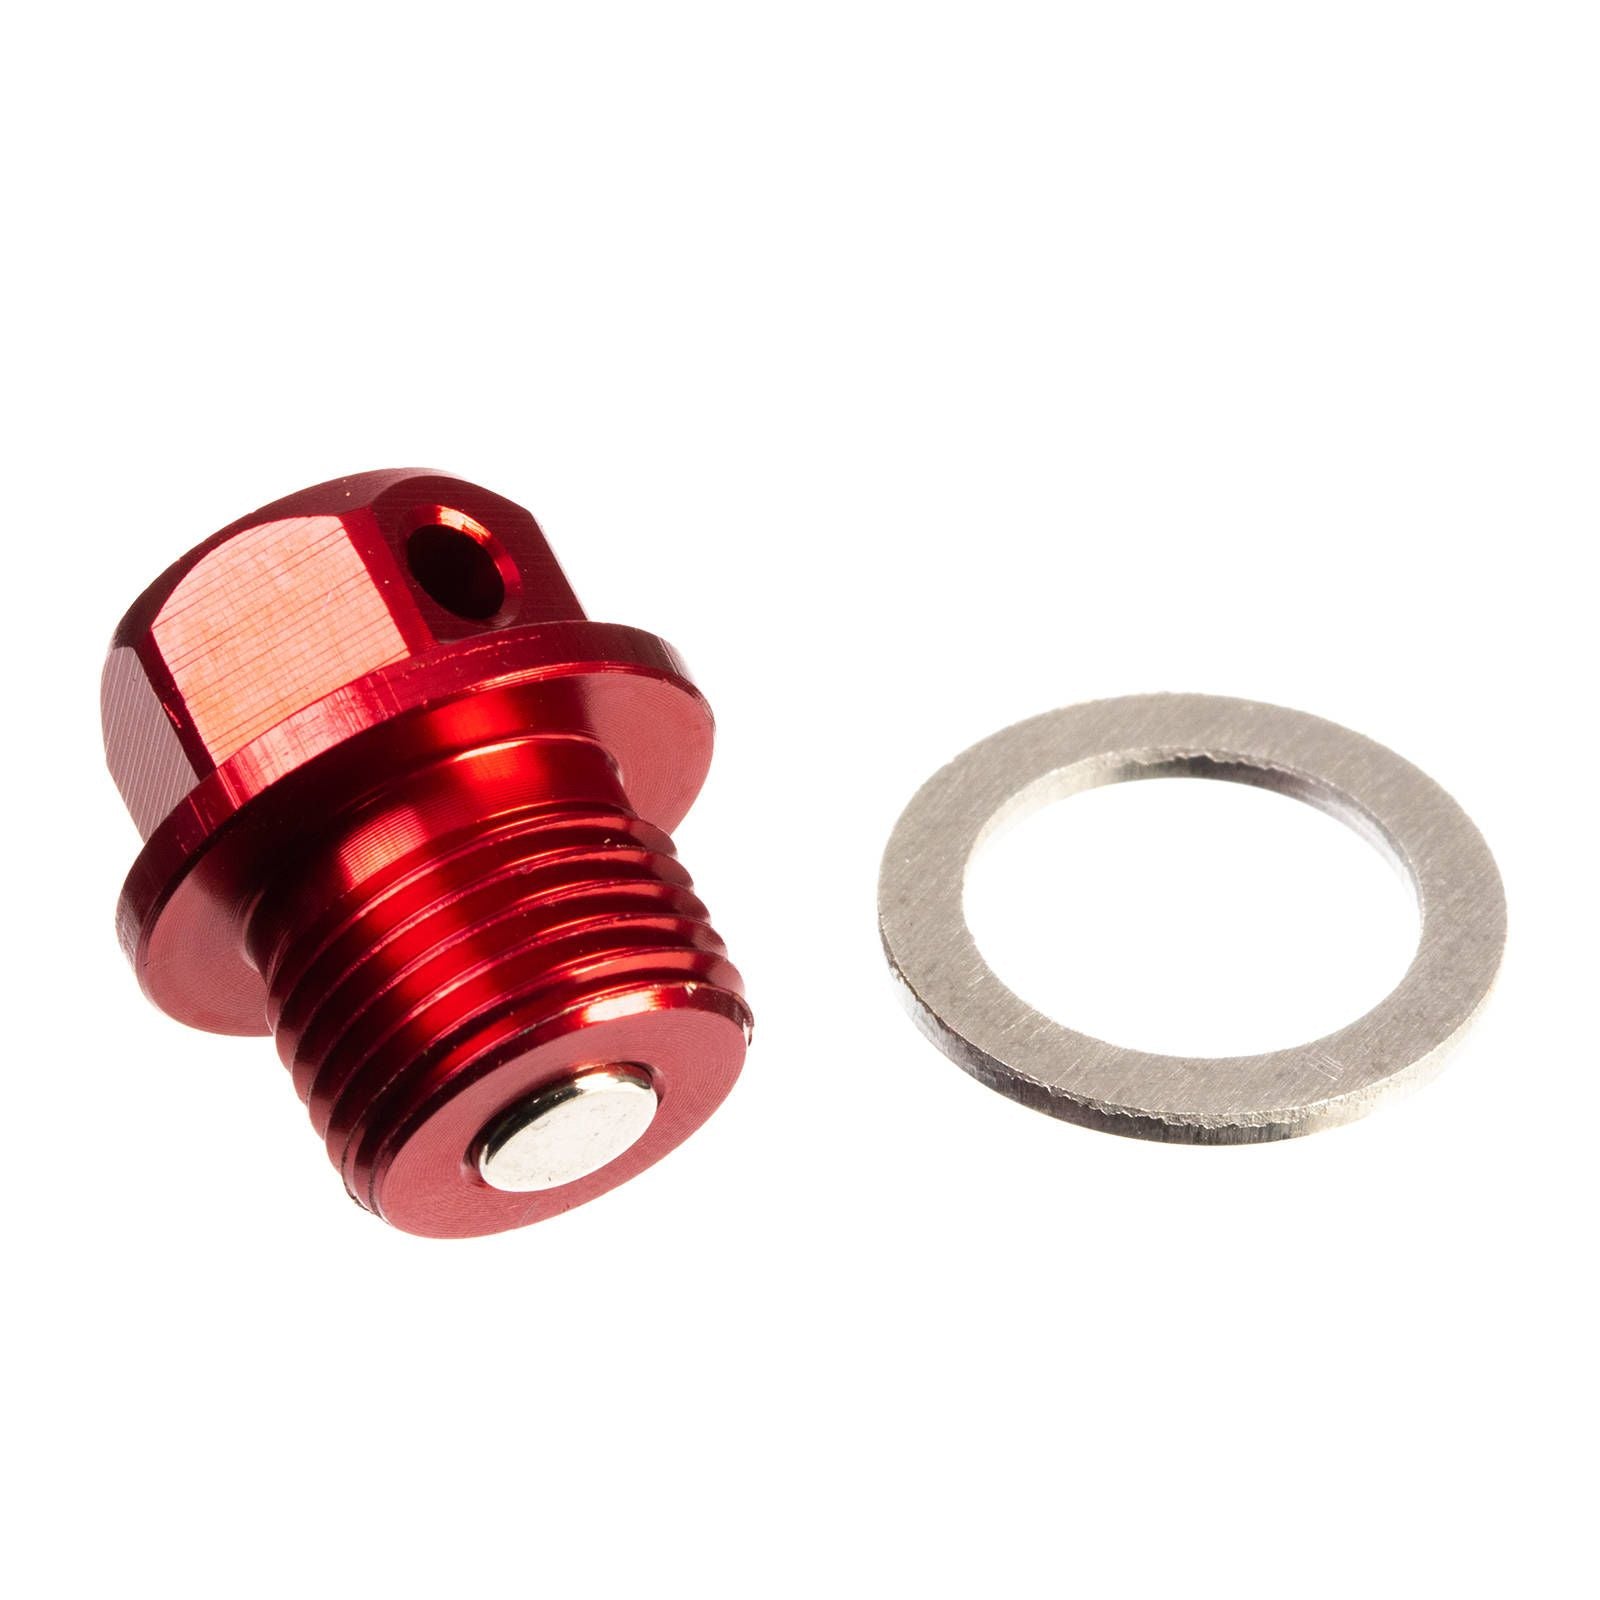 New WHITES Magnetic Sump Plug M14 x 10 x 1.25 - Red #WPMDP1410125R